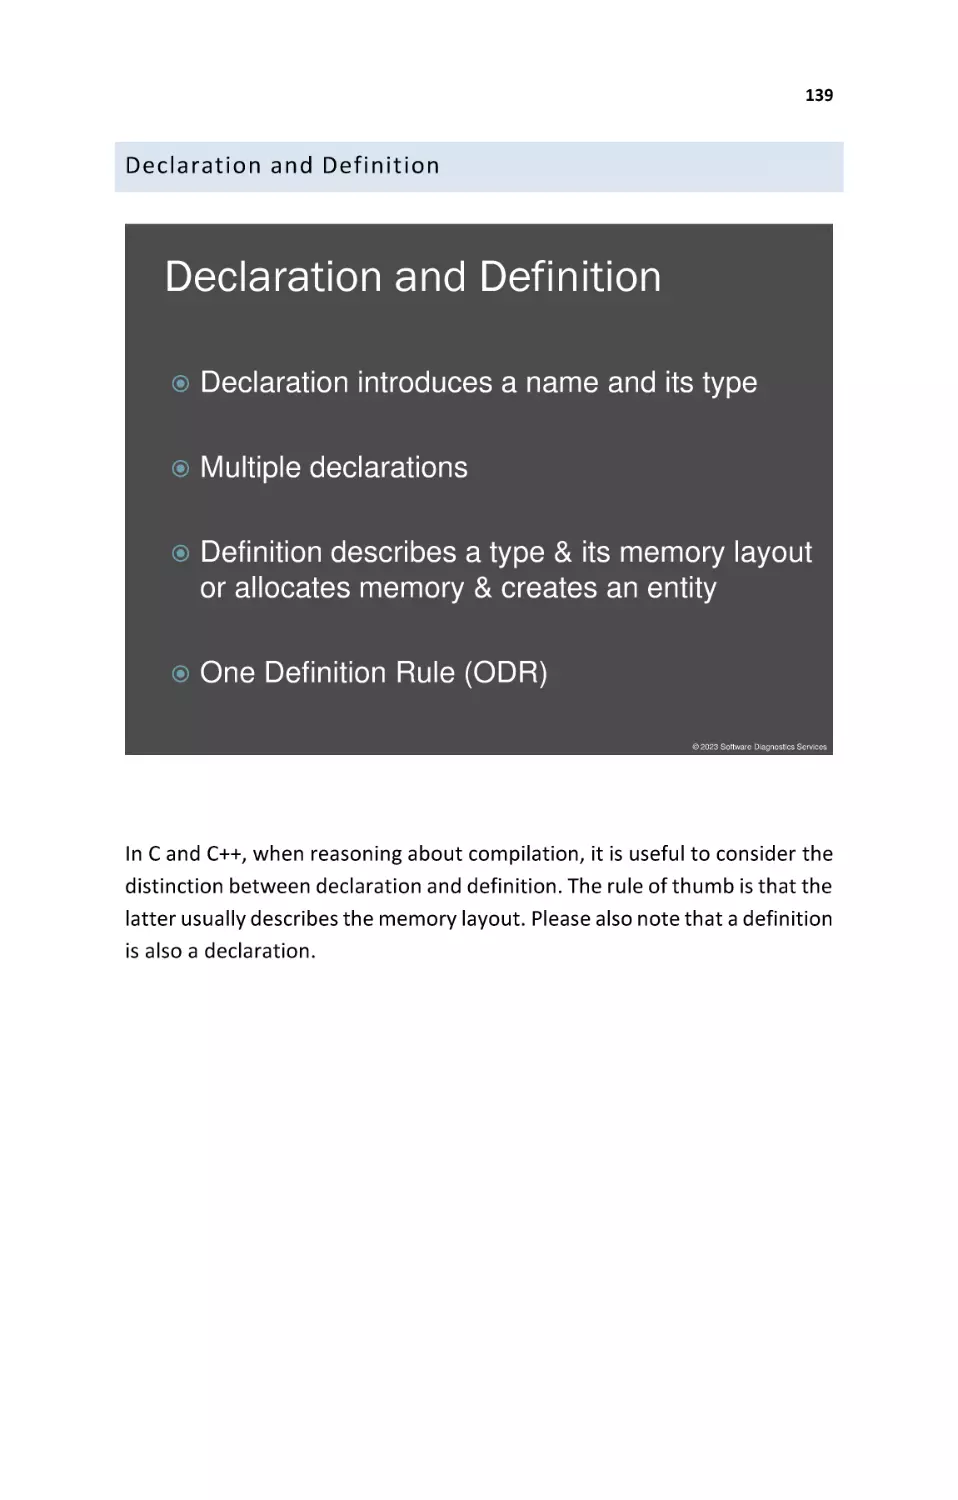 Declaration and Definition